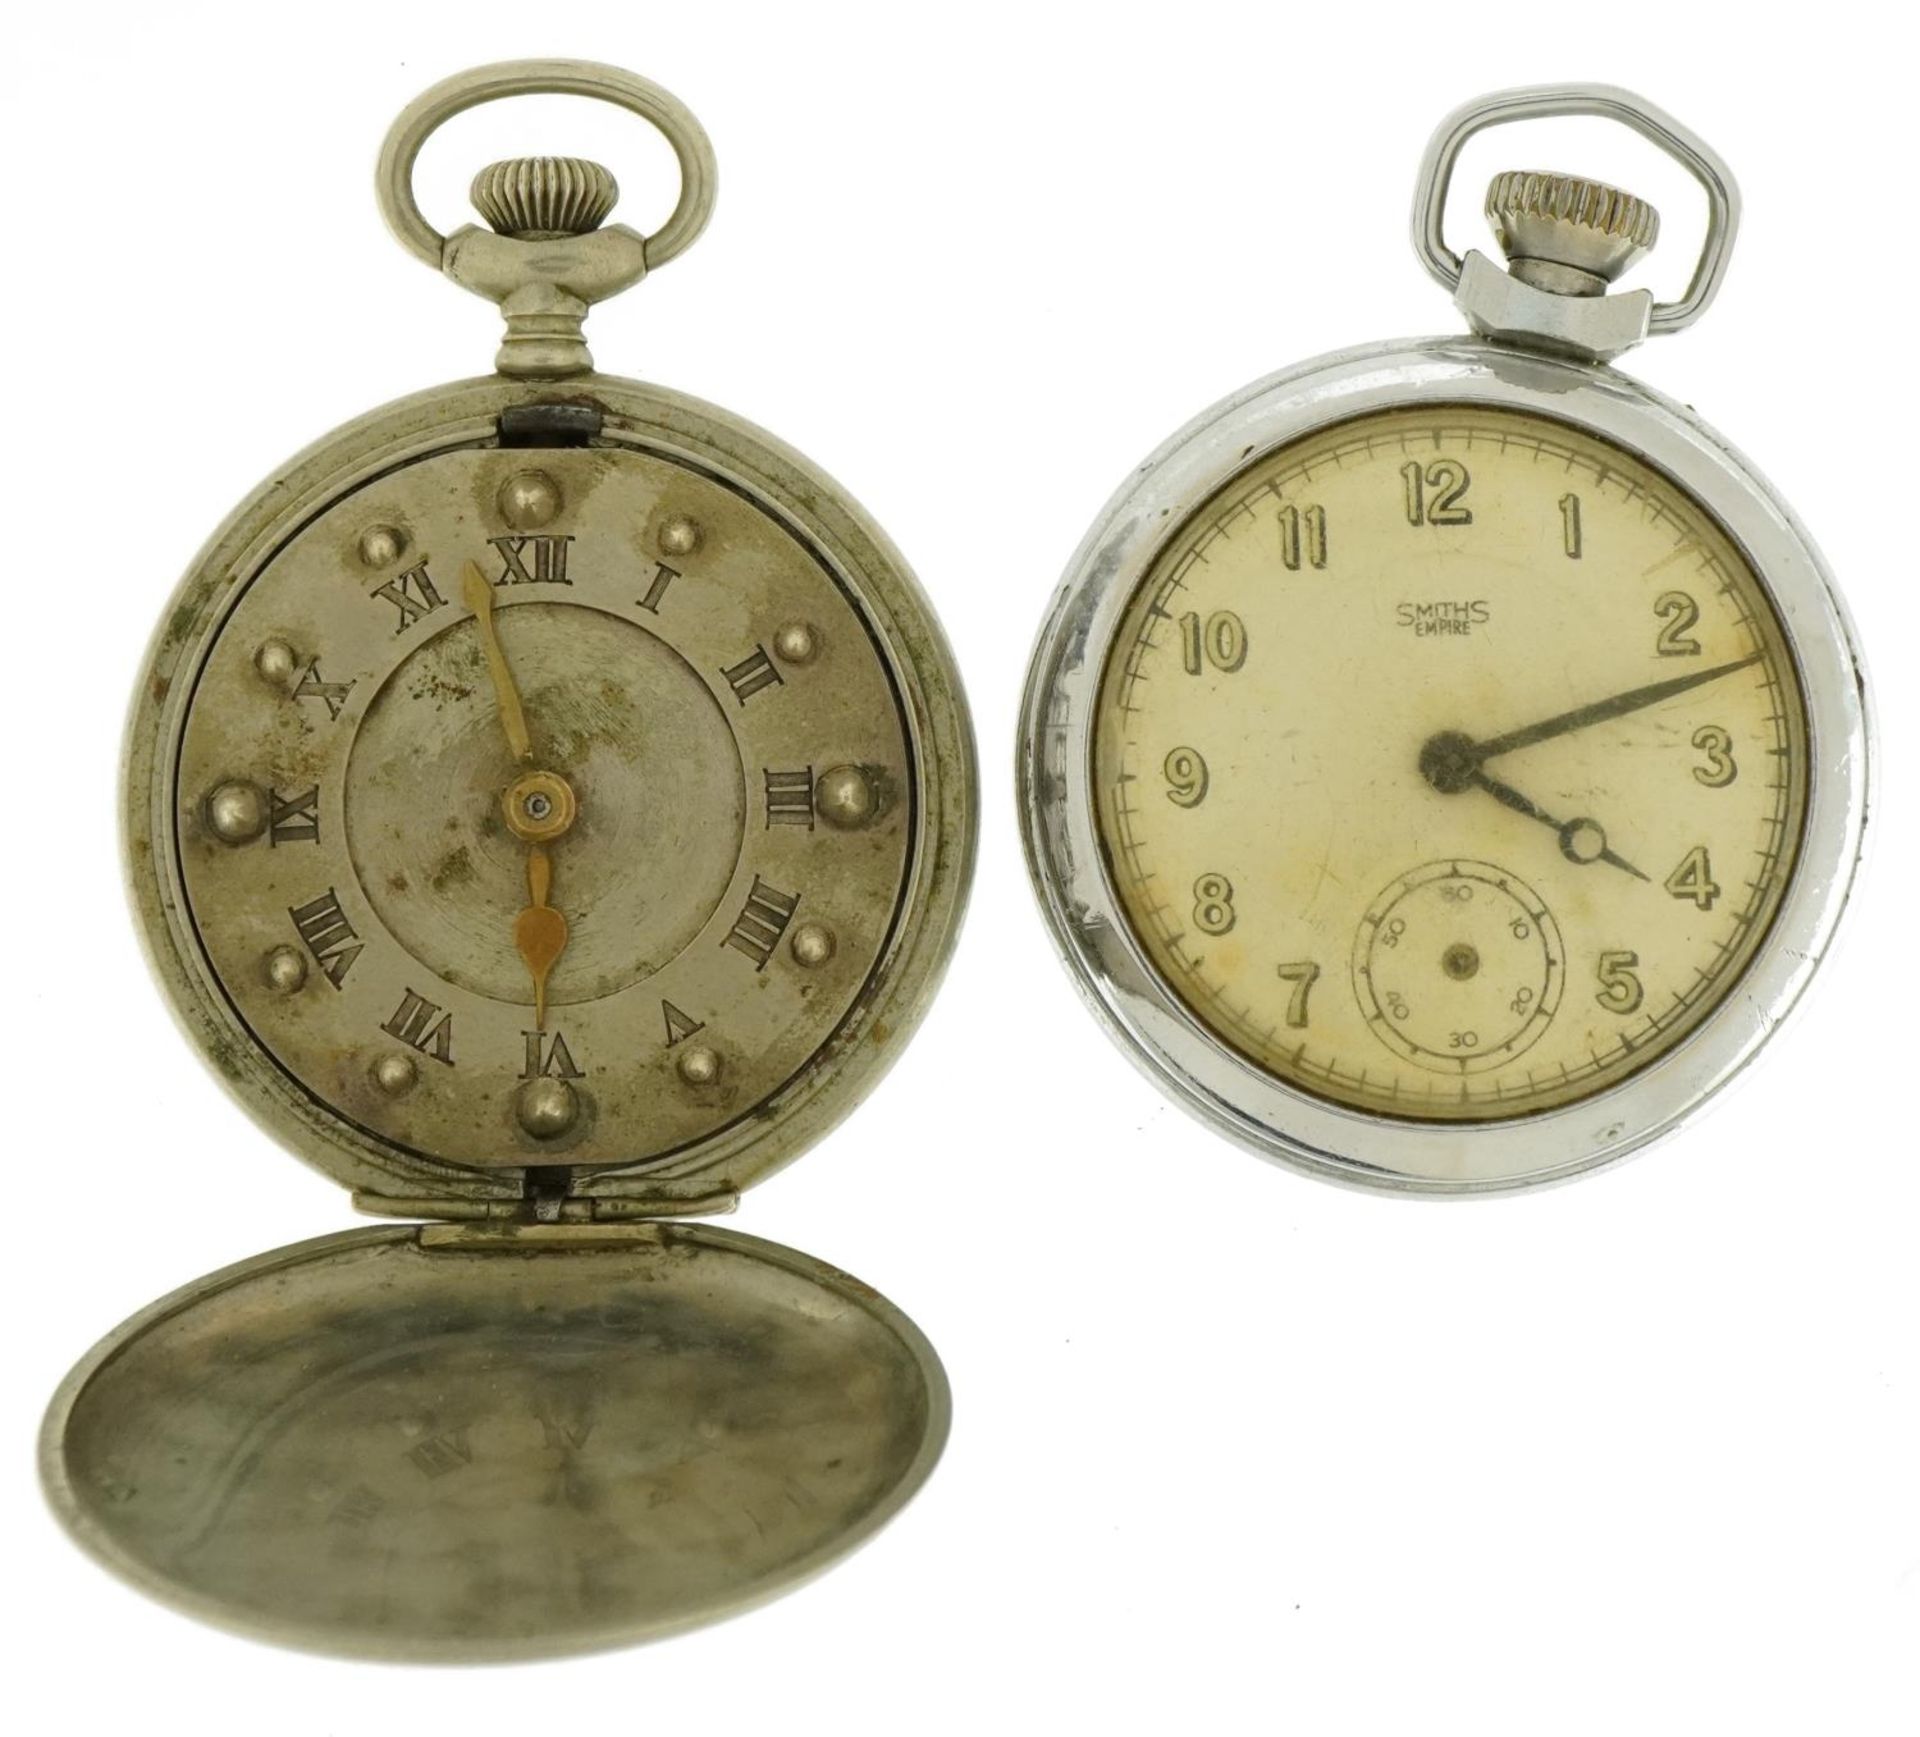 Smiths open face stop watch and a Cyma white metal full hunter braille pocket watch : For further